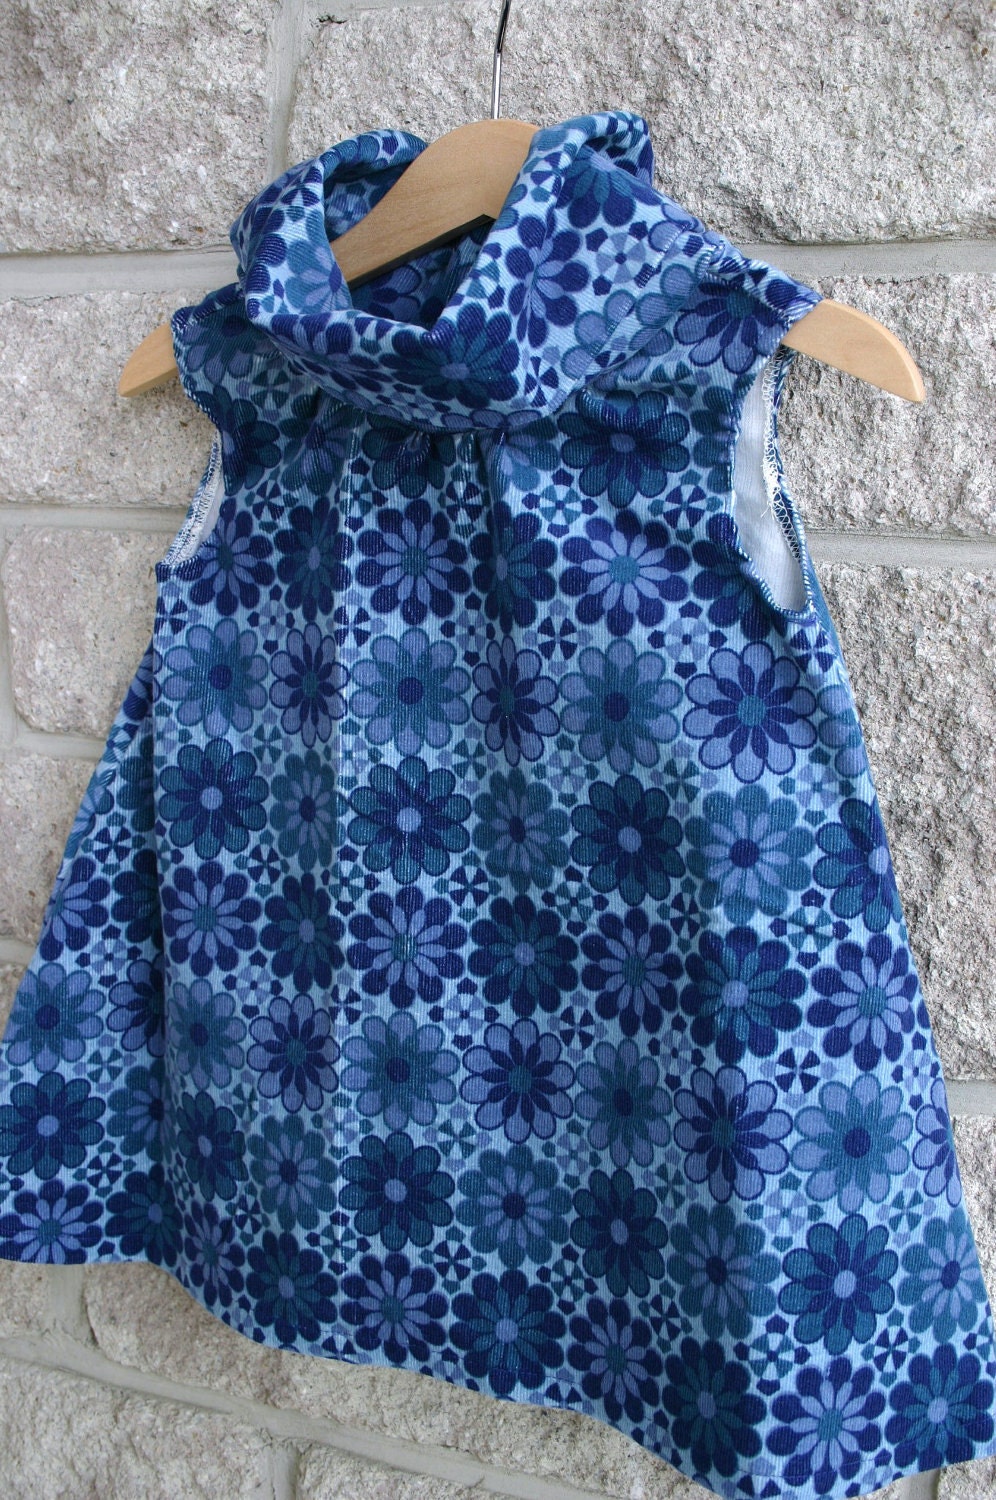 Posh Cowl Corduroy Dress in Blooming Blue, size 2T